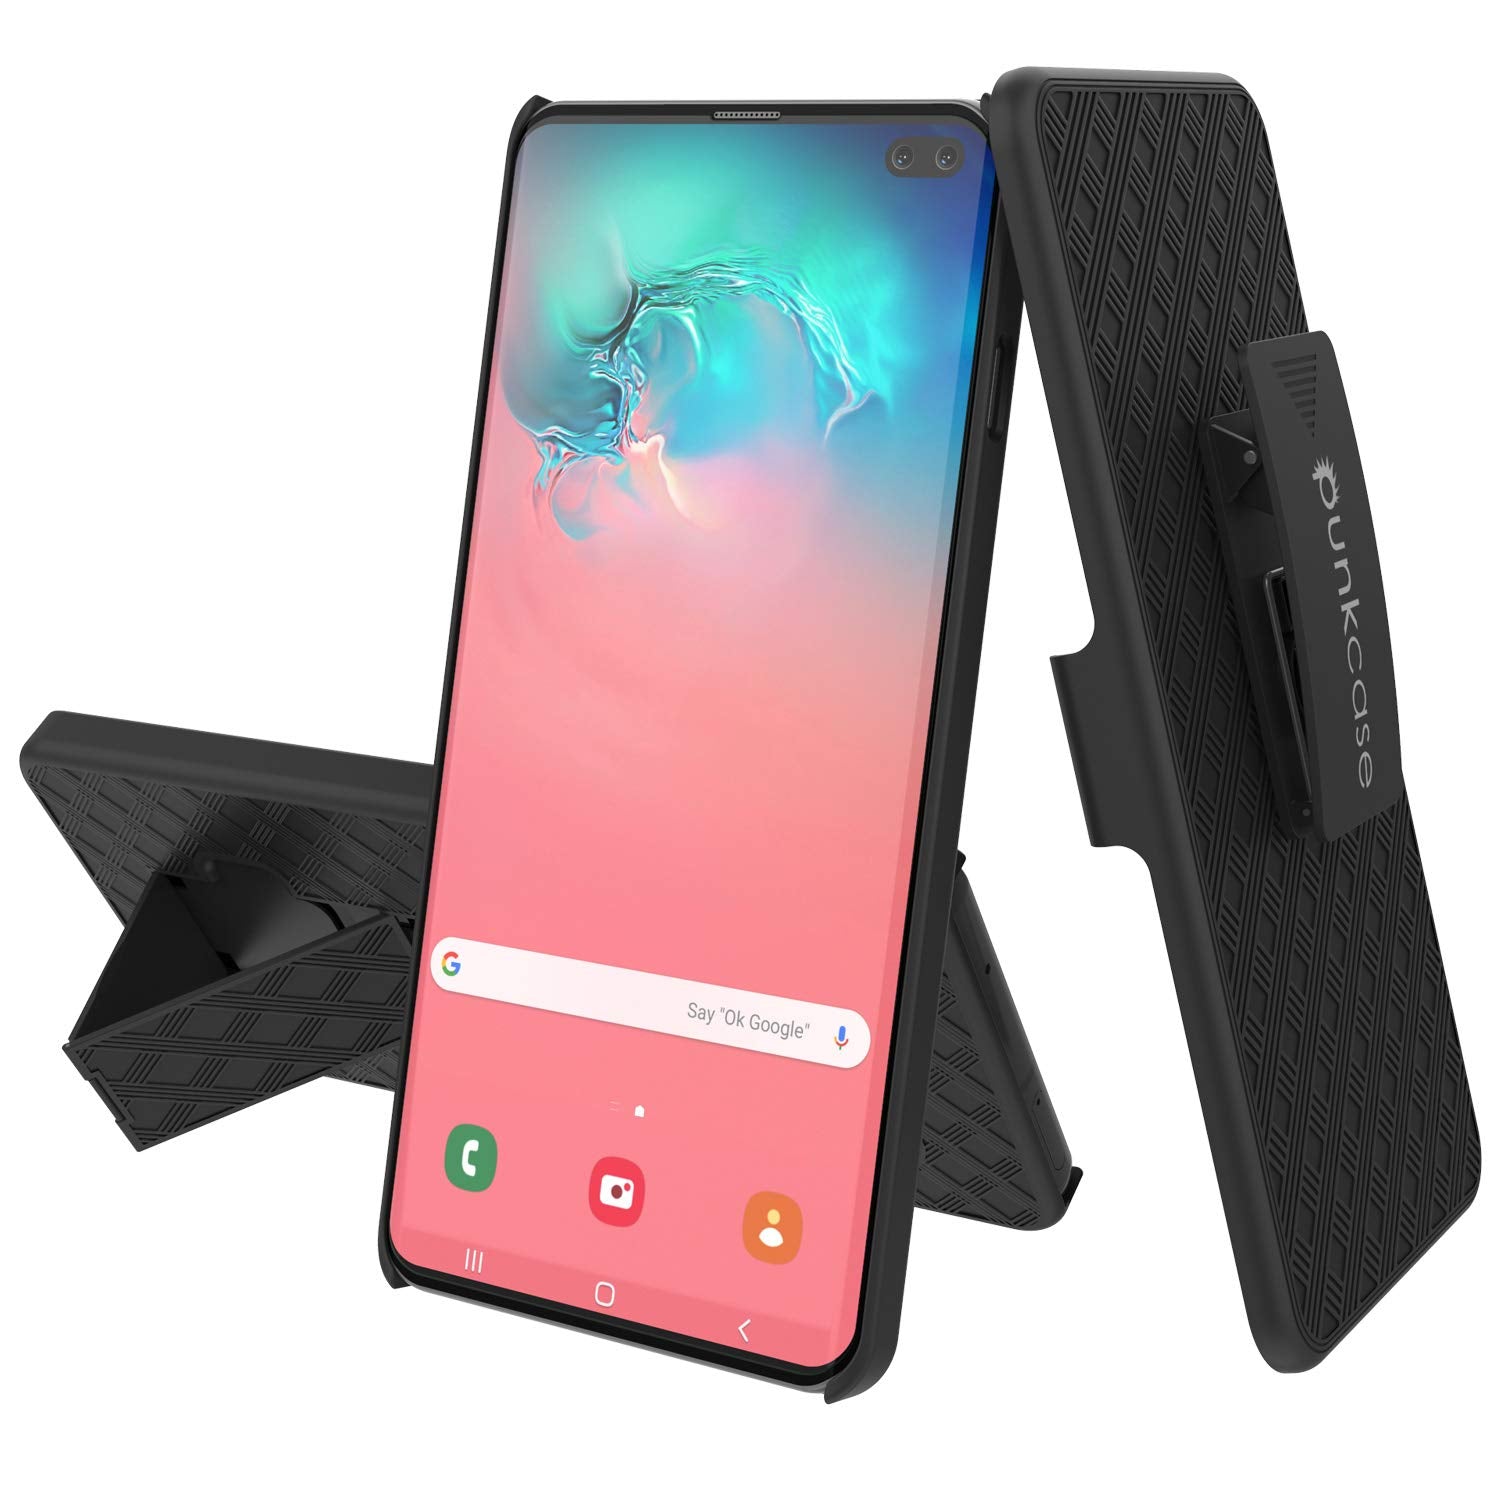 Punkcase Galaxy s10+ Plus Case With Screen Protector, Holster Belt Clip [Black]